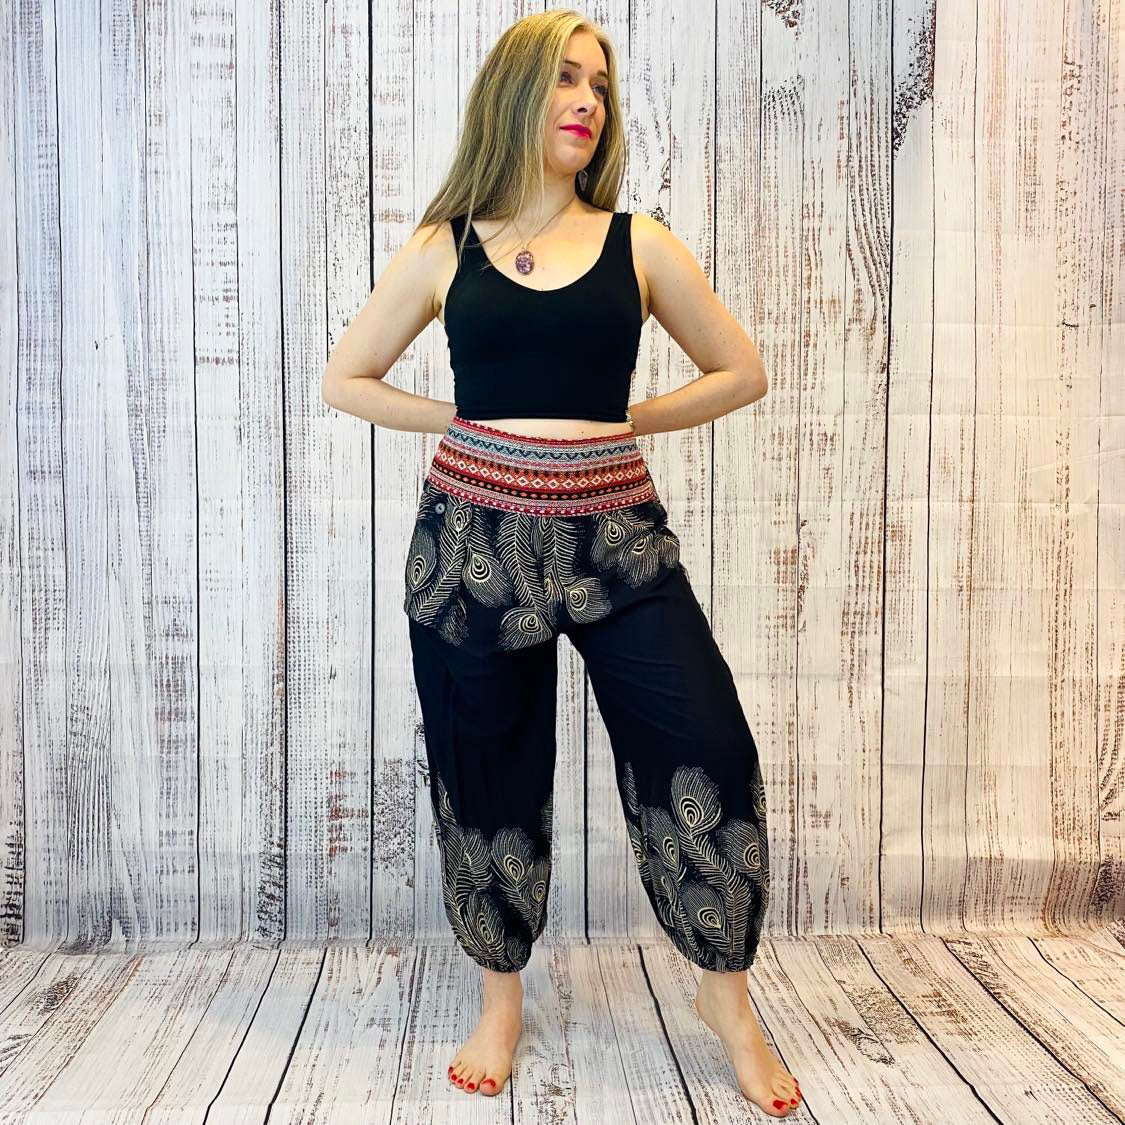 Hand Embroidery Light Weight Summer Pants